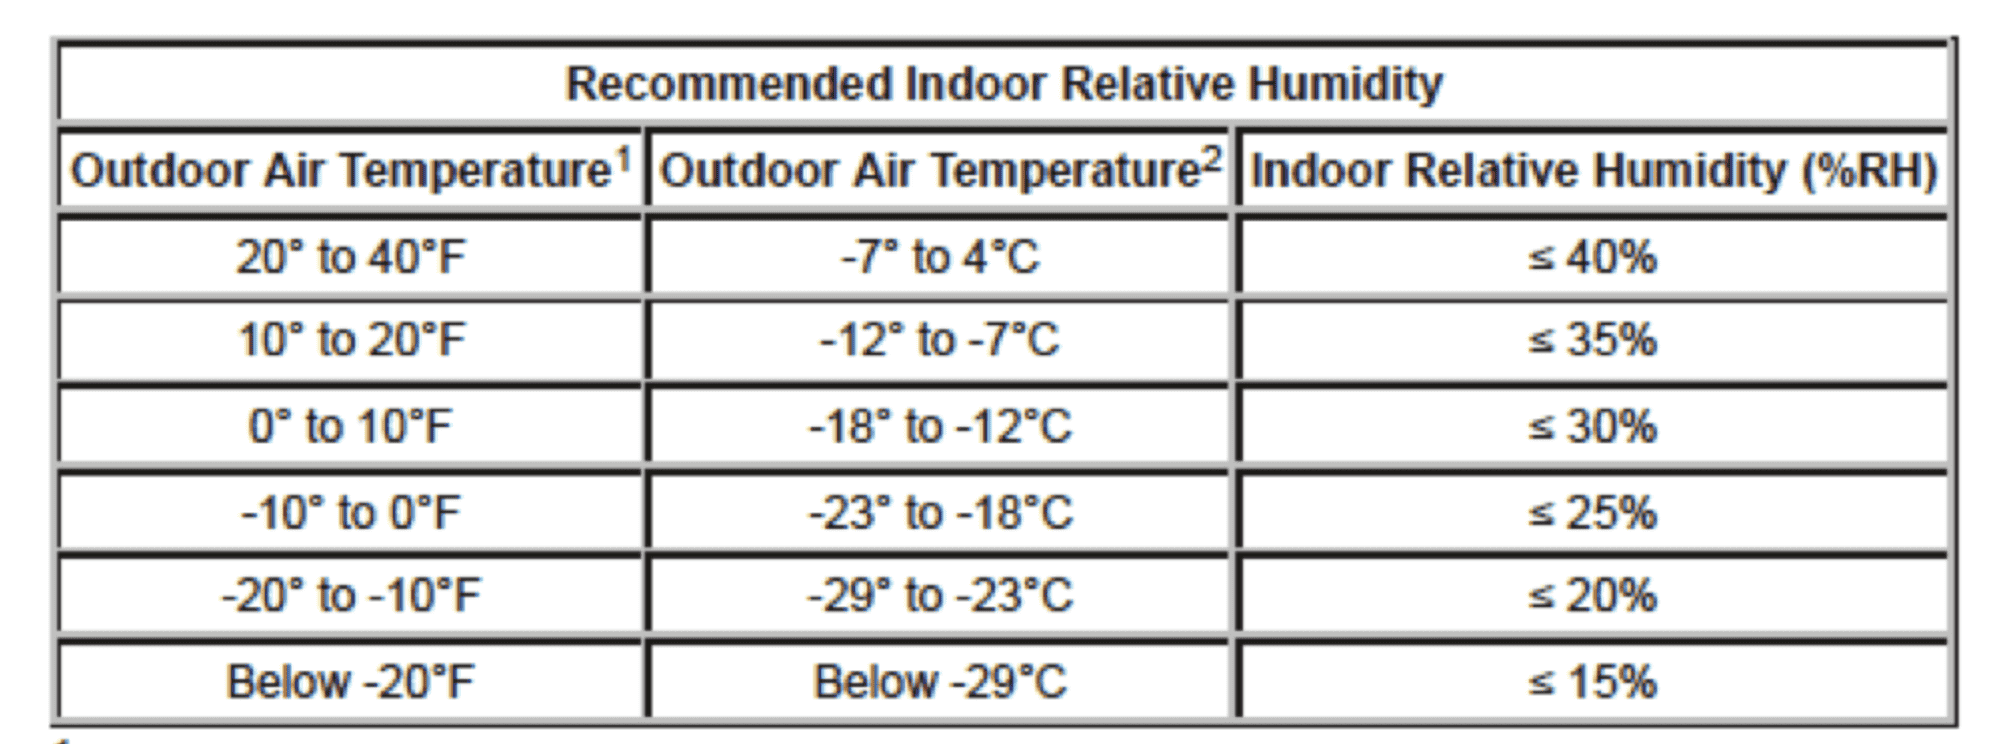 Recommended Indoor Relative Humidity